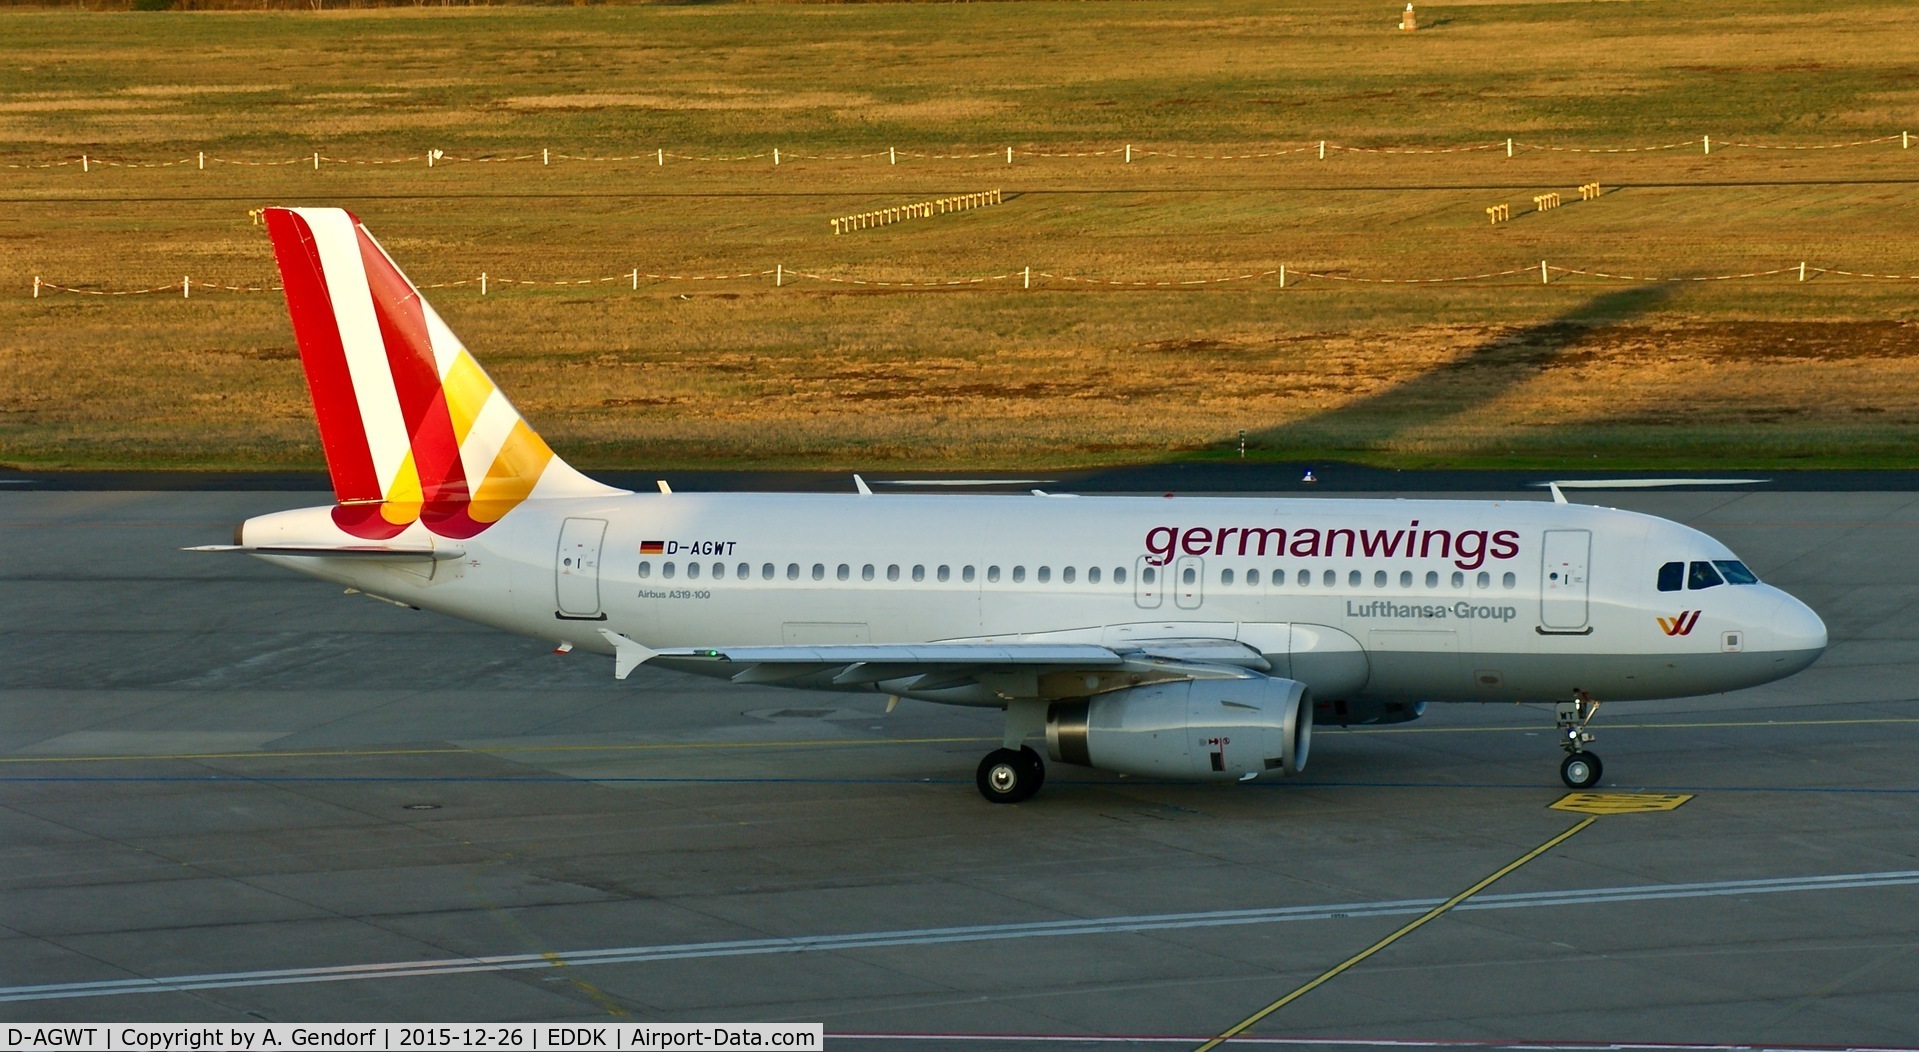 D-AGWT, 2012 Airbus A319-132 C/N 5043, Germanwings, is here after pushback on the apron at Köln / Bonn Airport(EDDK)